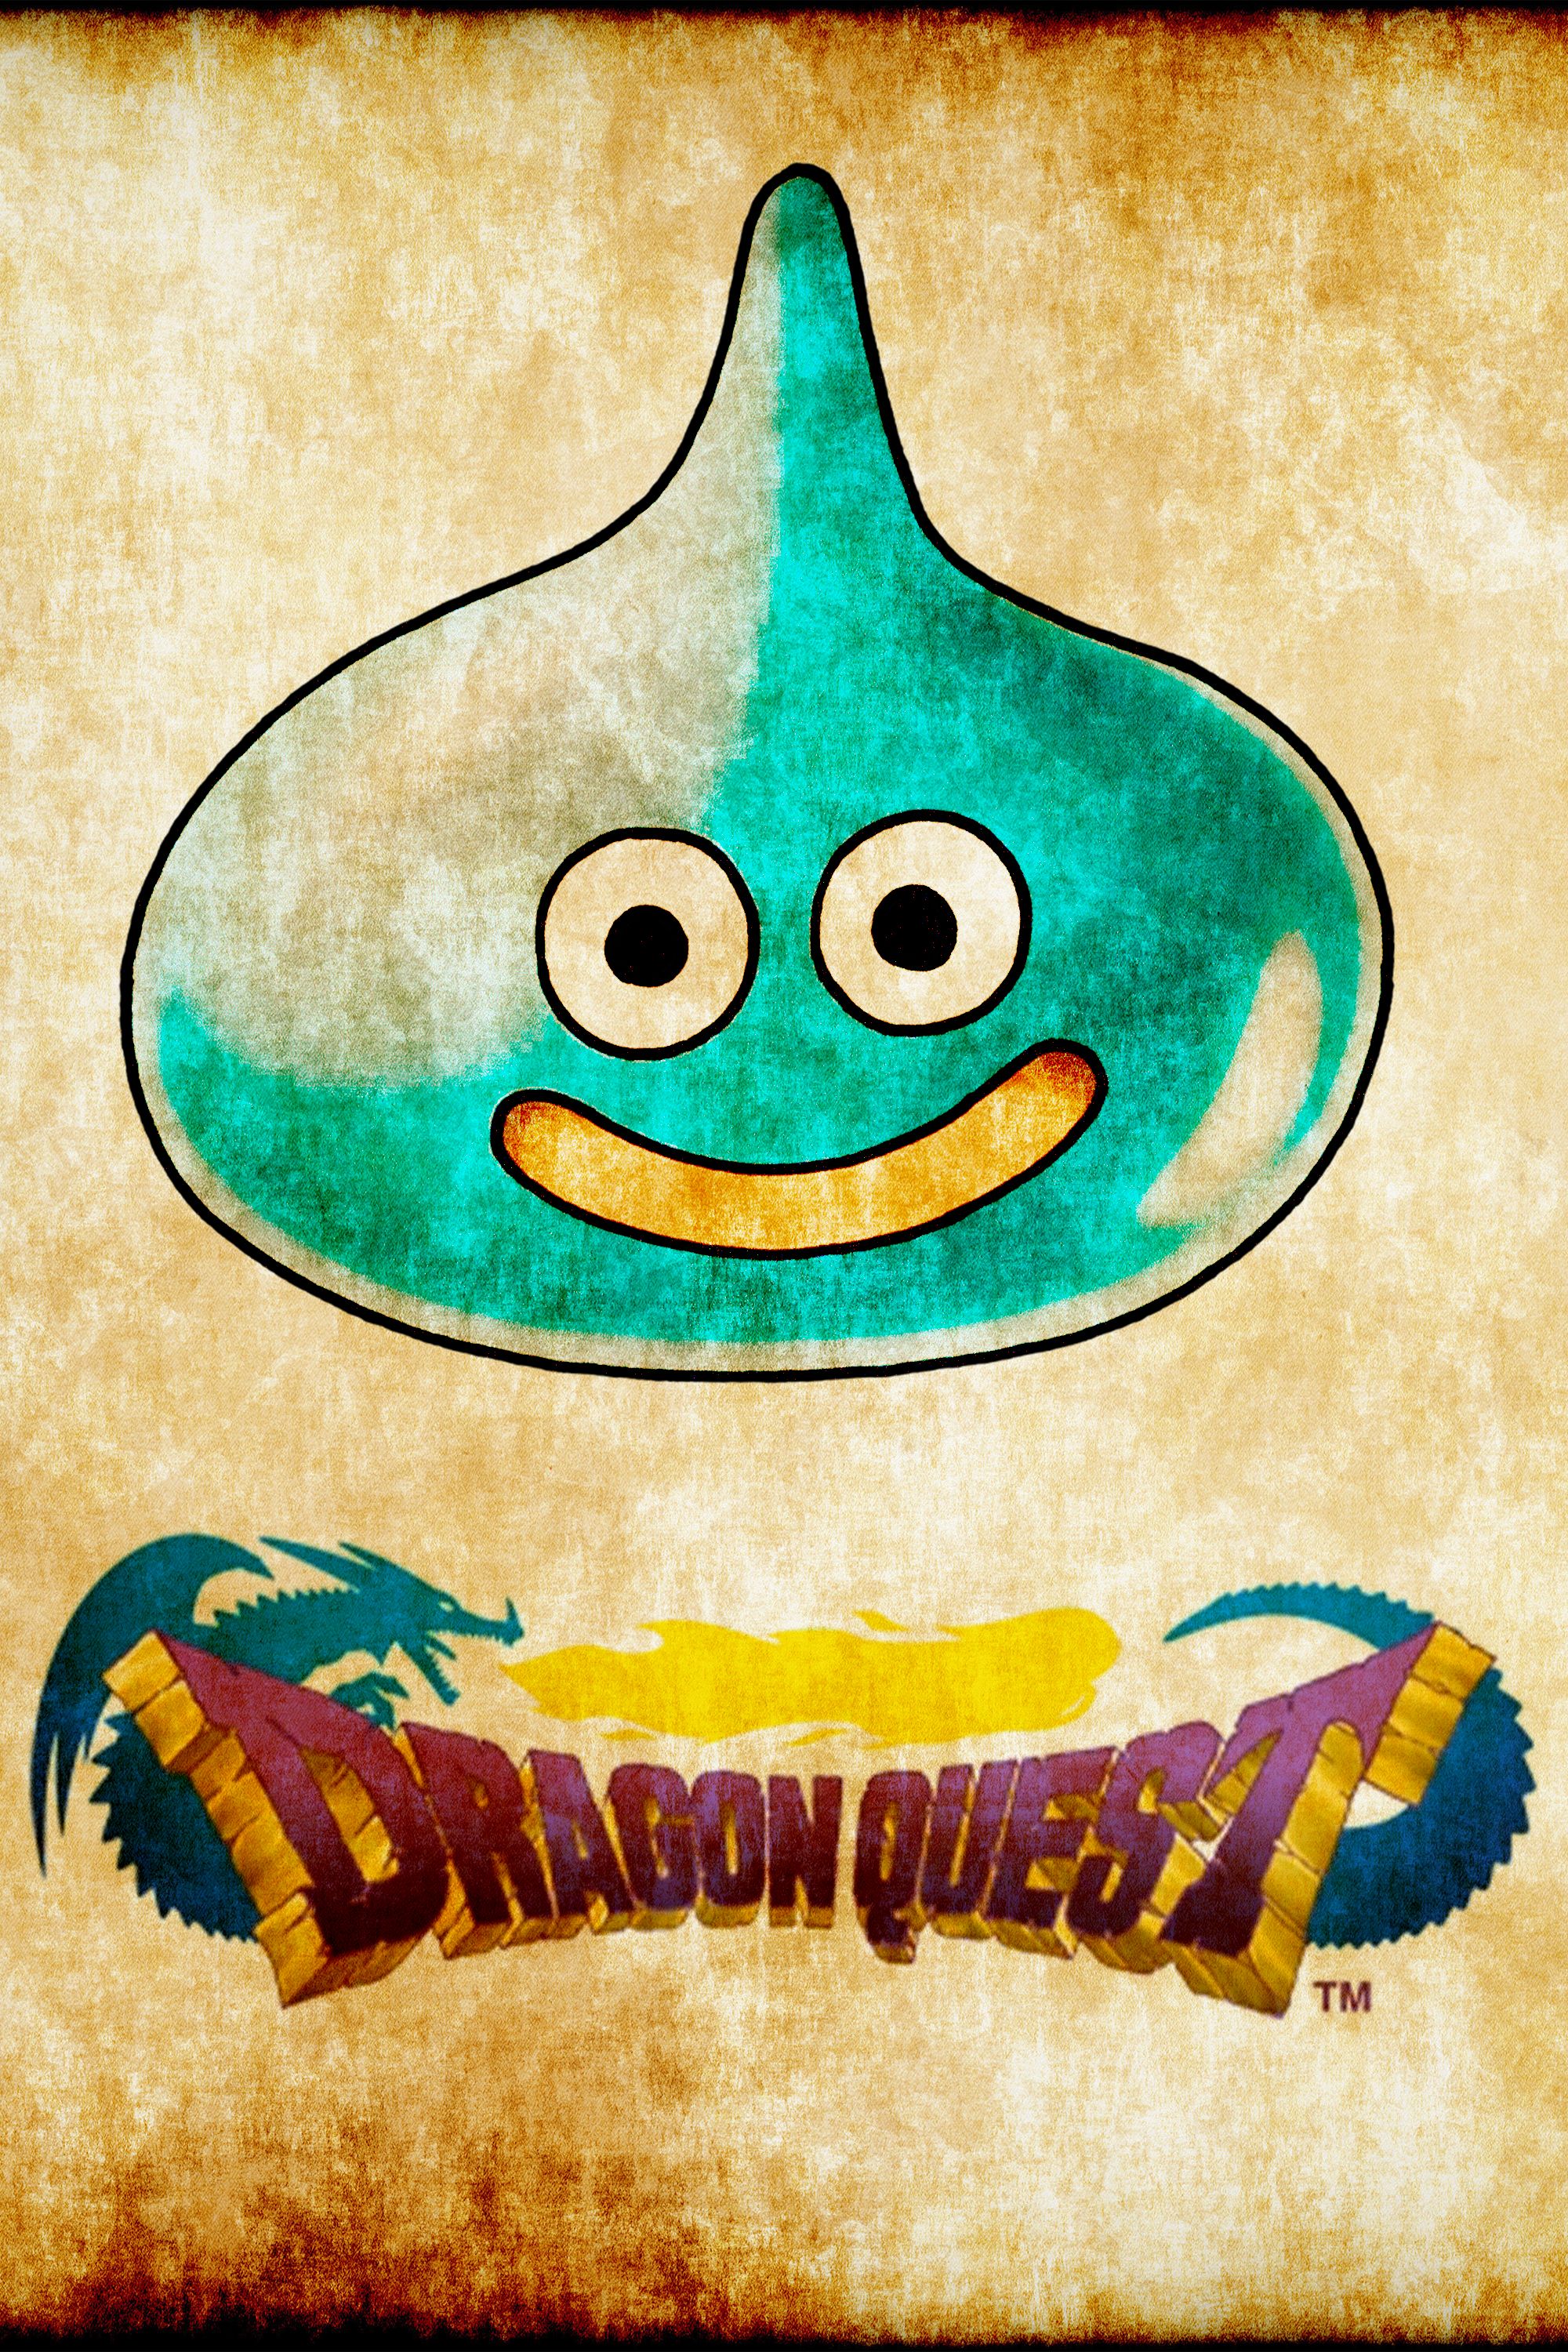 dragon-quest-series-game-franchise